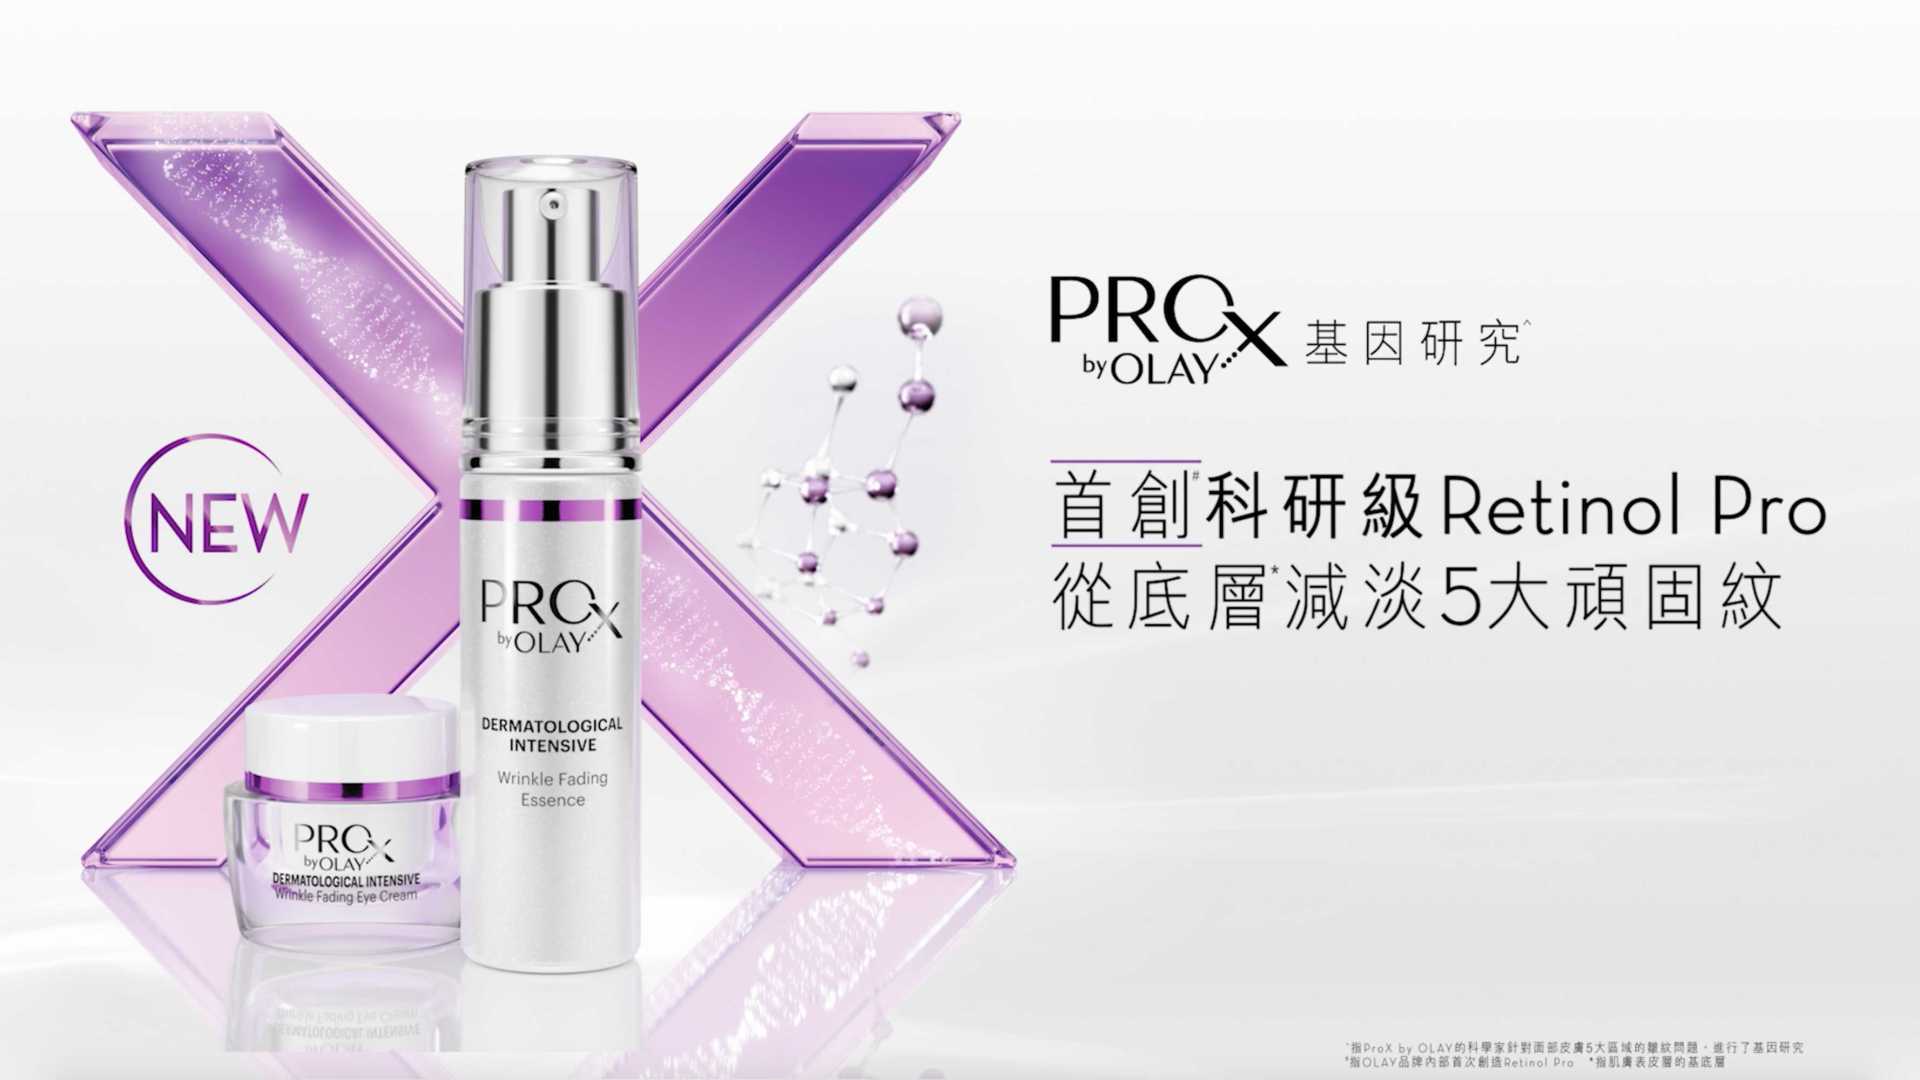 PRO X By OLAY 渗透+保湿+温和 Demo Video